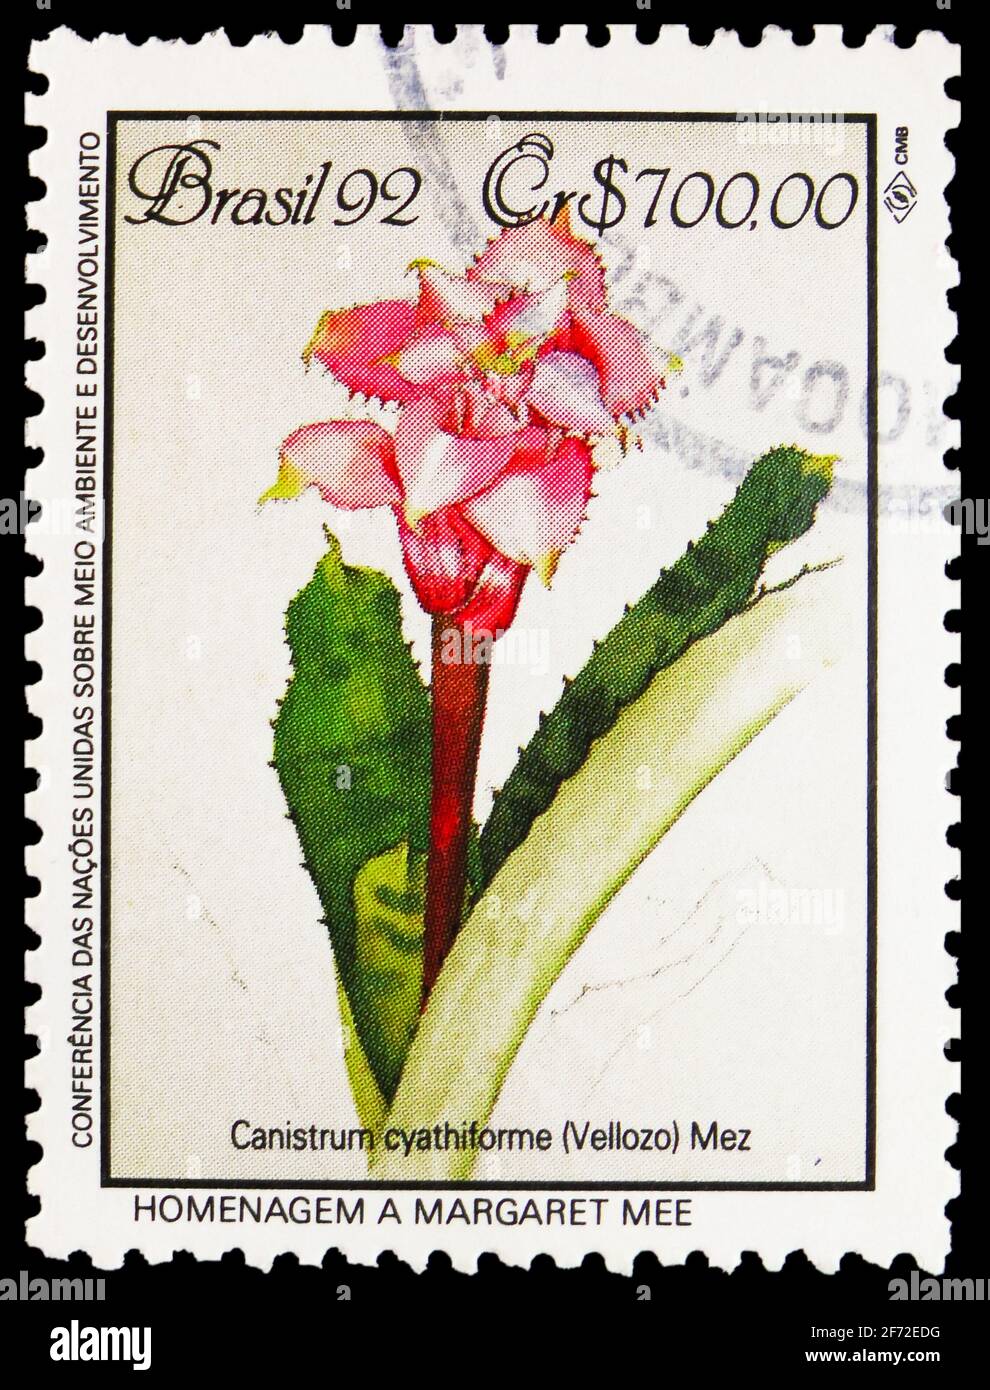 MOSCOW, RUSSIA - JANUARY 20, 2021: Postage stamp printed in Brazil shows Atlantic forest protection, Canistrum cyathiforme, UNCED Conference for Envir Stock Photo